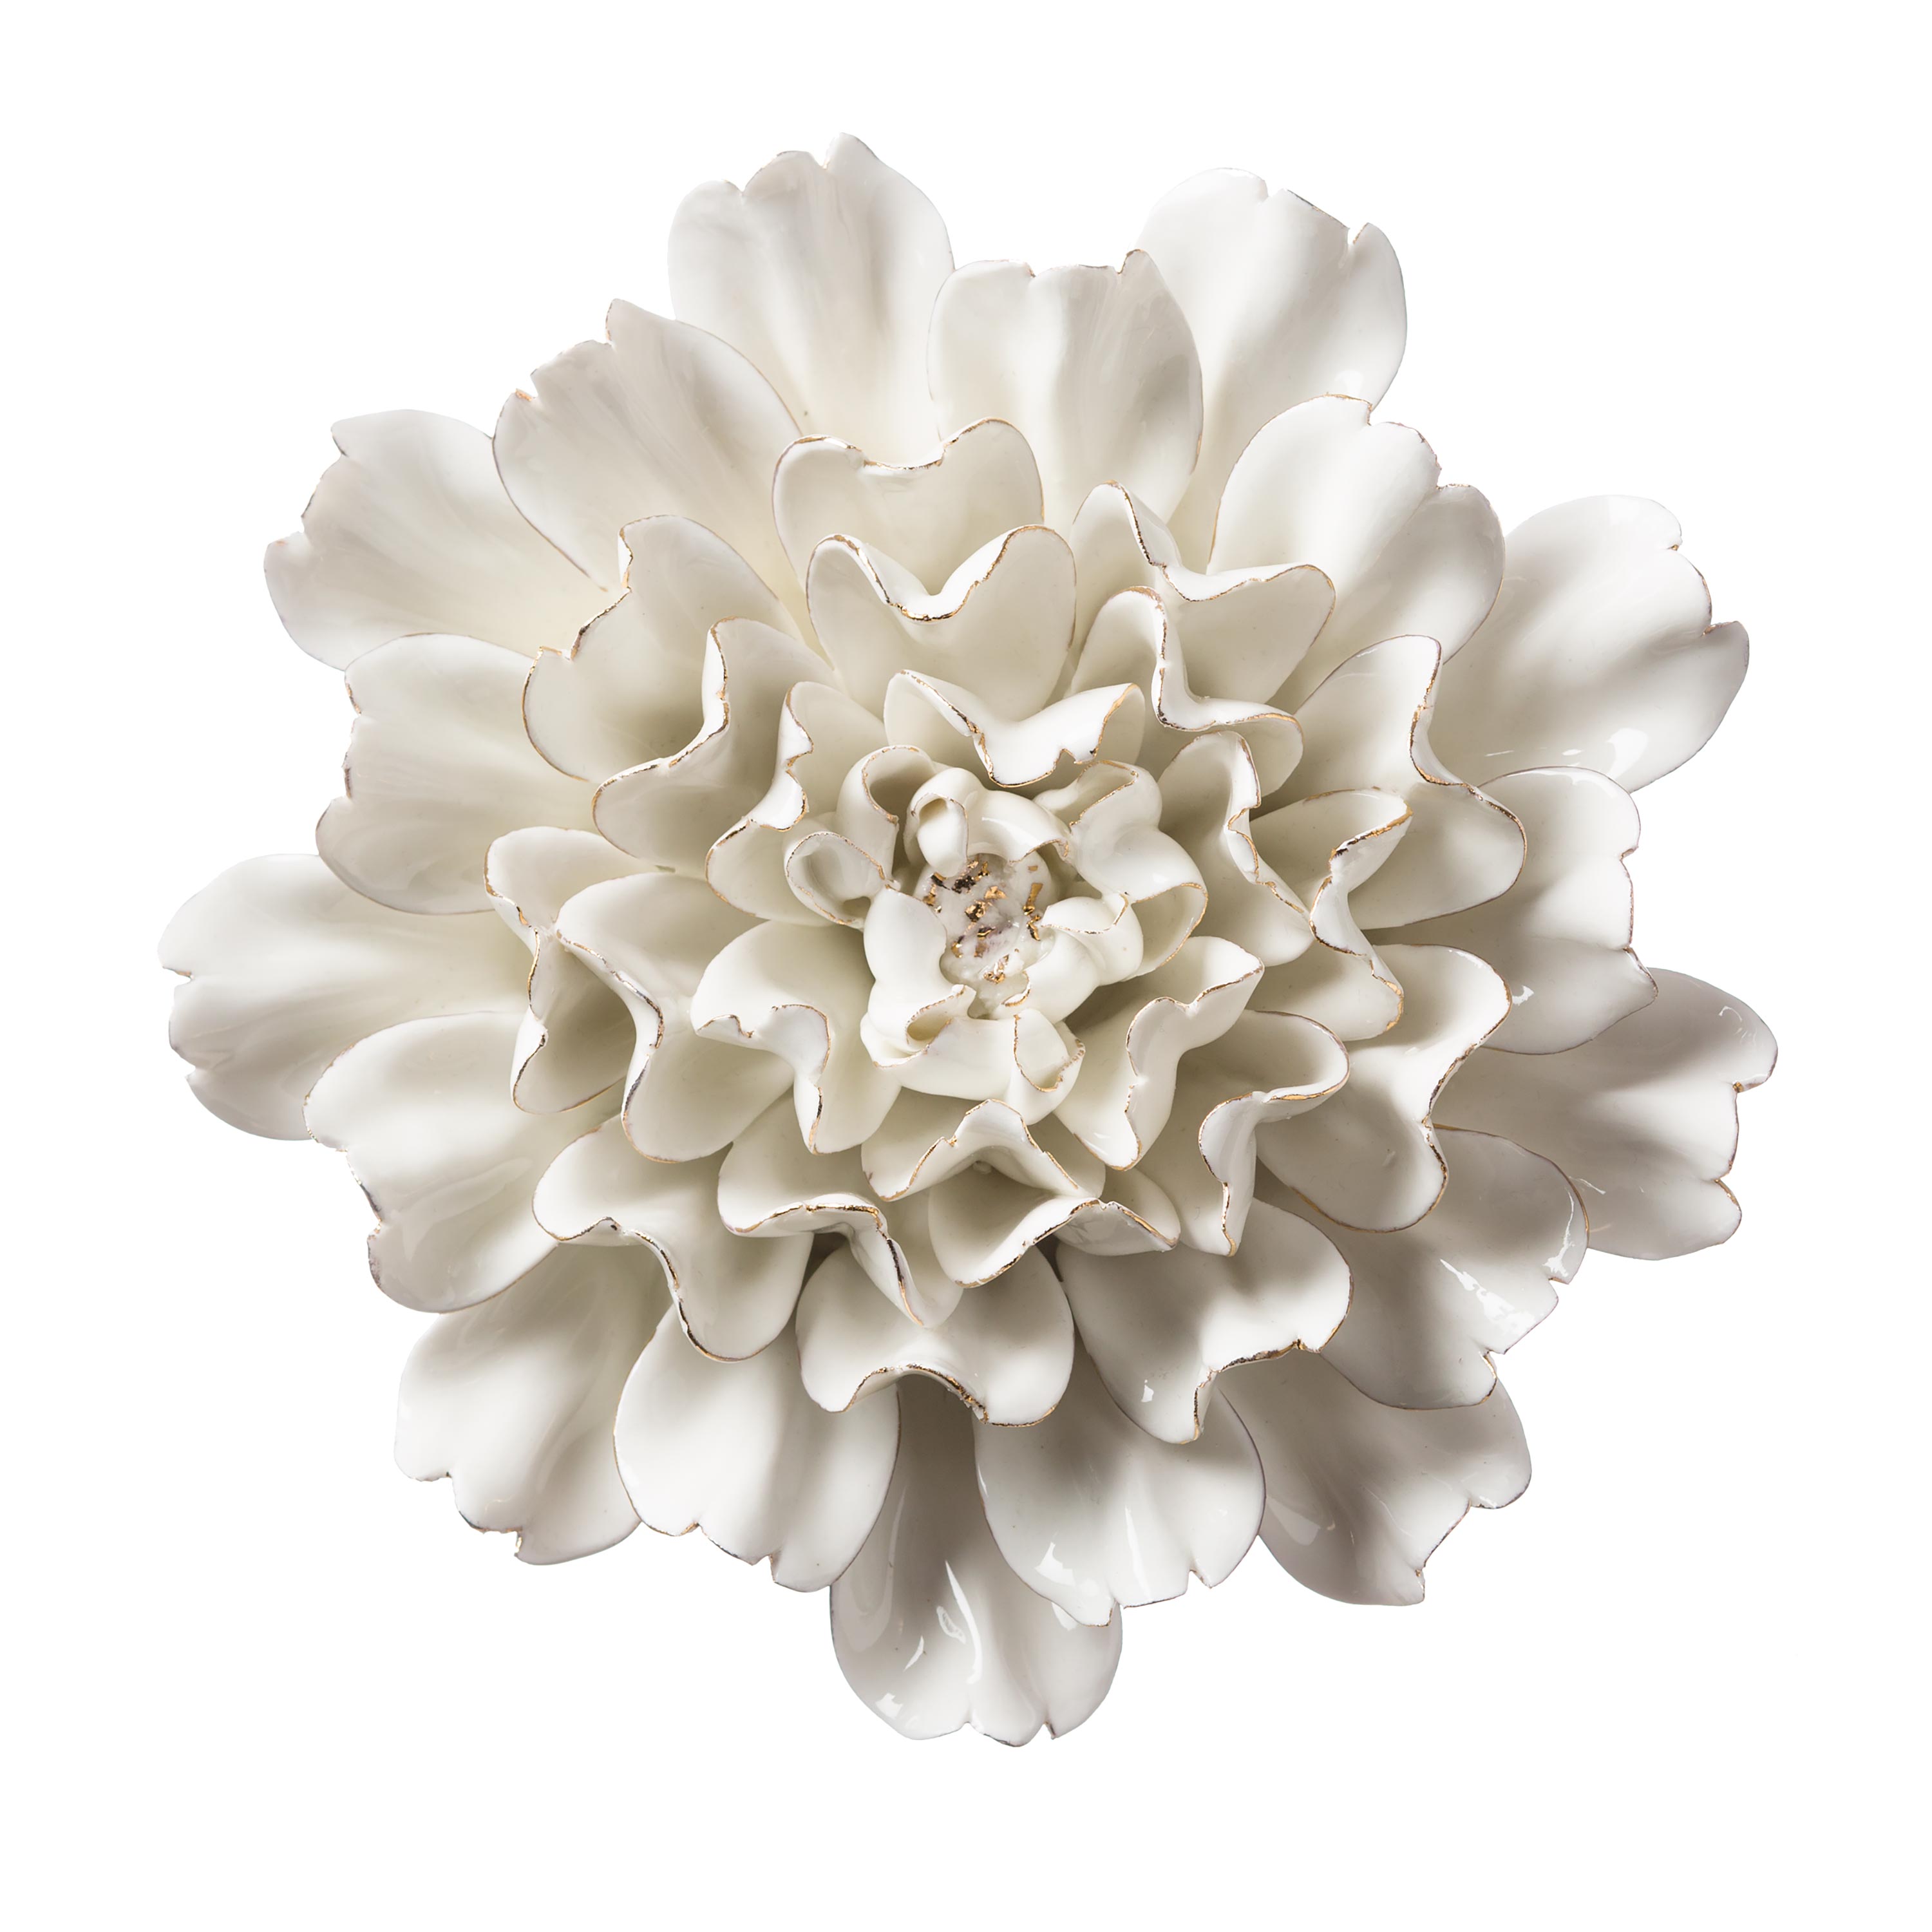 "Bright" Ceramic Wall Flower Collection